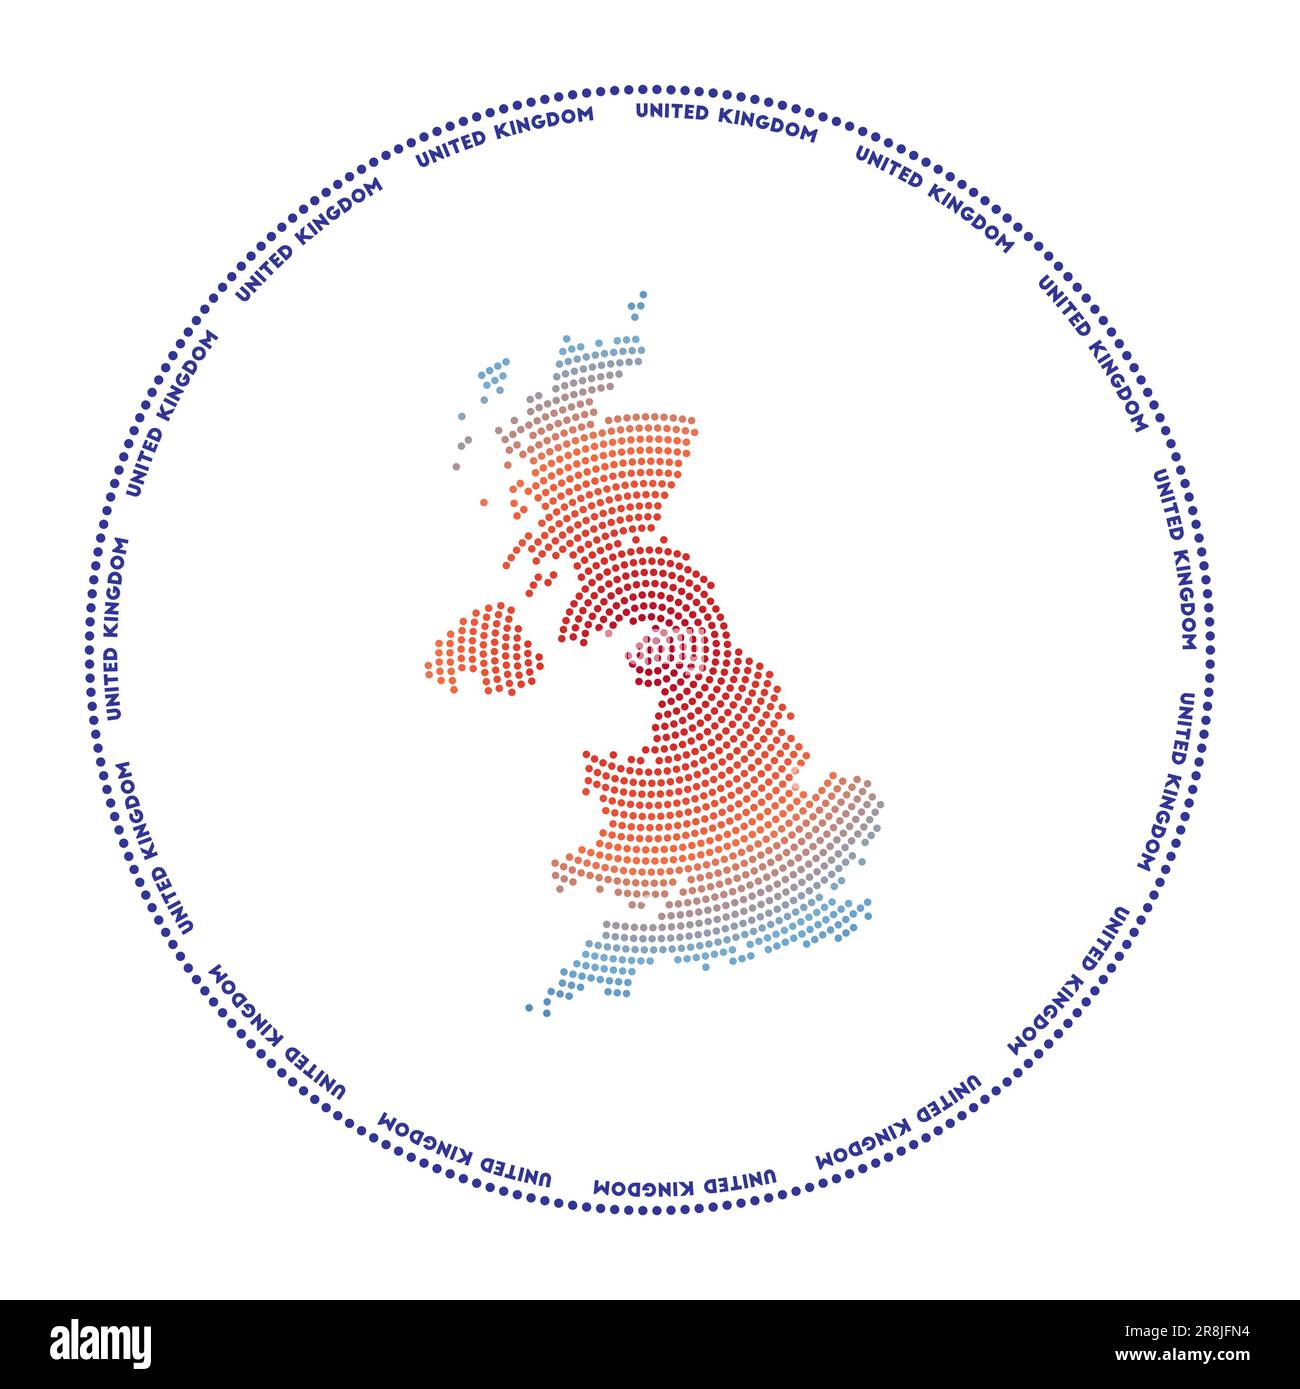 United Kingdom round logo. Digital style shape of United Kingdom in dotted circle with country name. Tech icon of the country with gradiented dots. Po Stock Vector